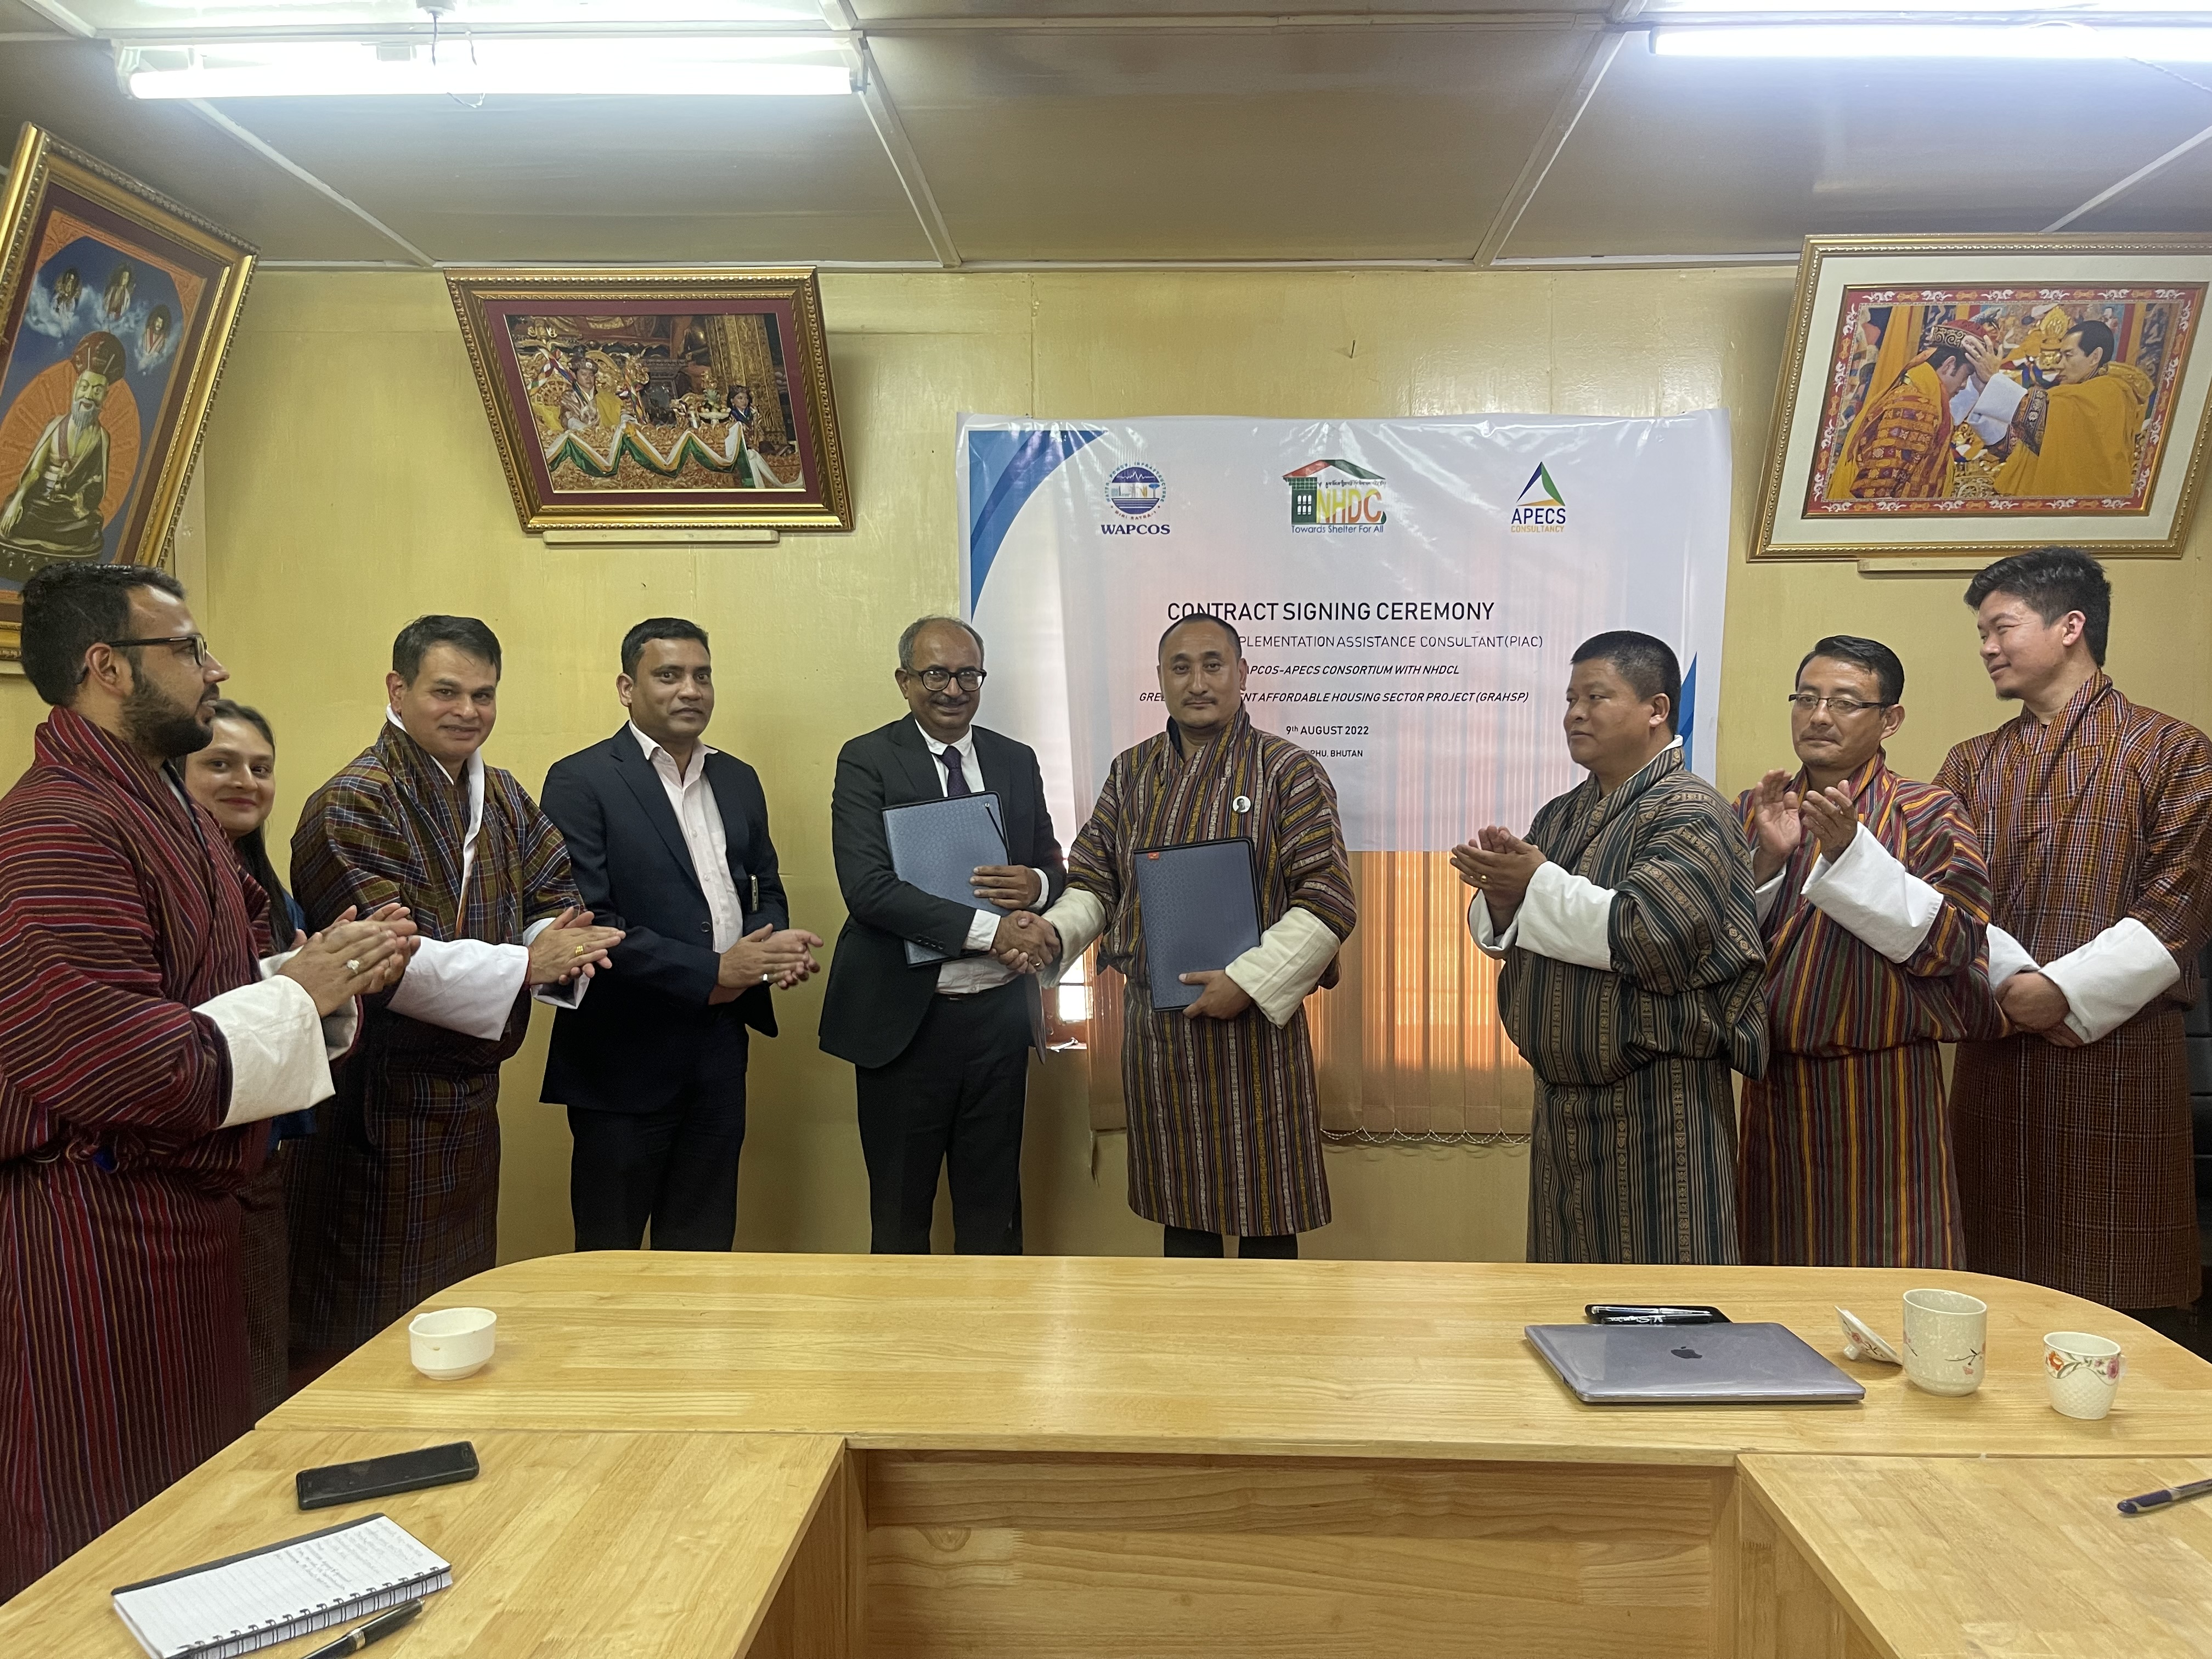 On 9th August, the Contract Agreement for Project Implementation Assistance Consultant (PIAC) for Green and Resilient Affordable Housing Sector Project (GRAHSP) was signed between National Housing Development Corporation Limited and WAPCOS Limited in association with APECS Consultancy.